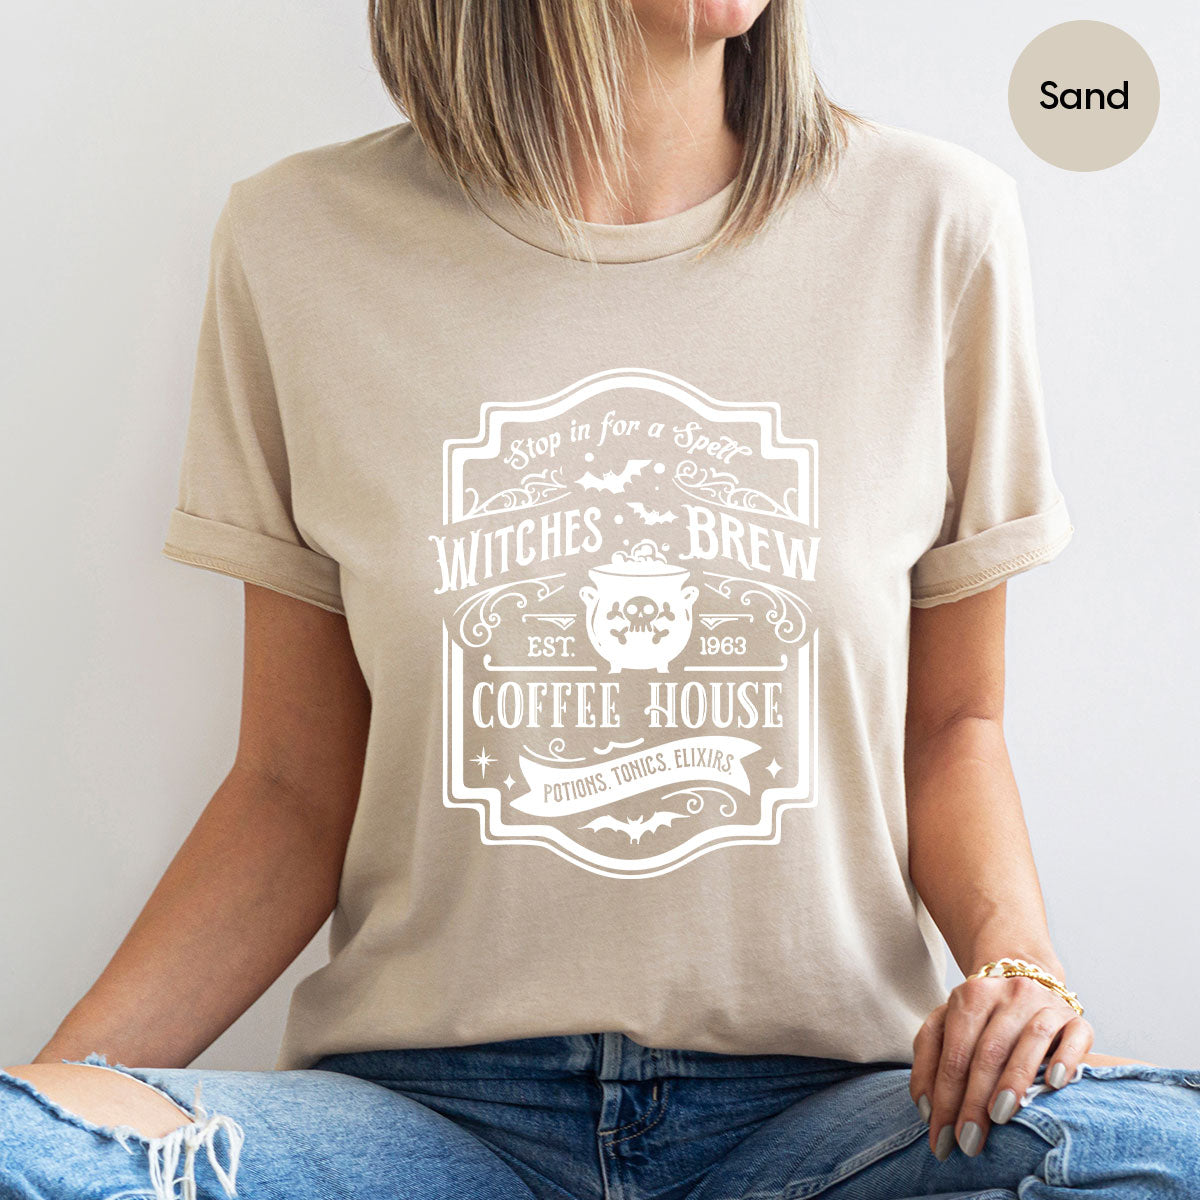 Halloween Shirt, Witchy Gifts, Spooky Season Tshirt, Spell Vneck T Shirt, Shirts for Women, Gifts for Her, Witch's Brew Graphic Tees